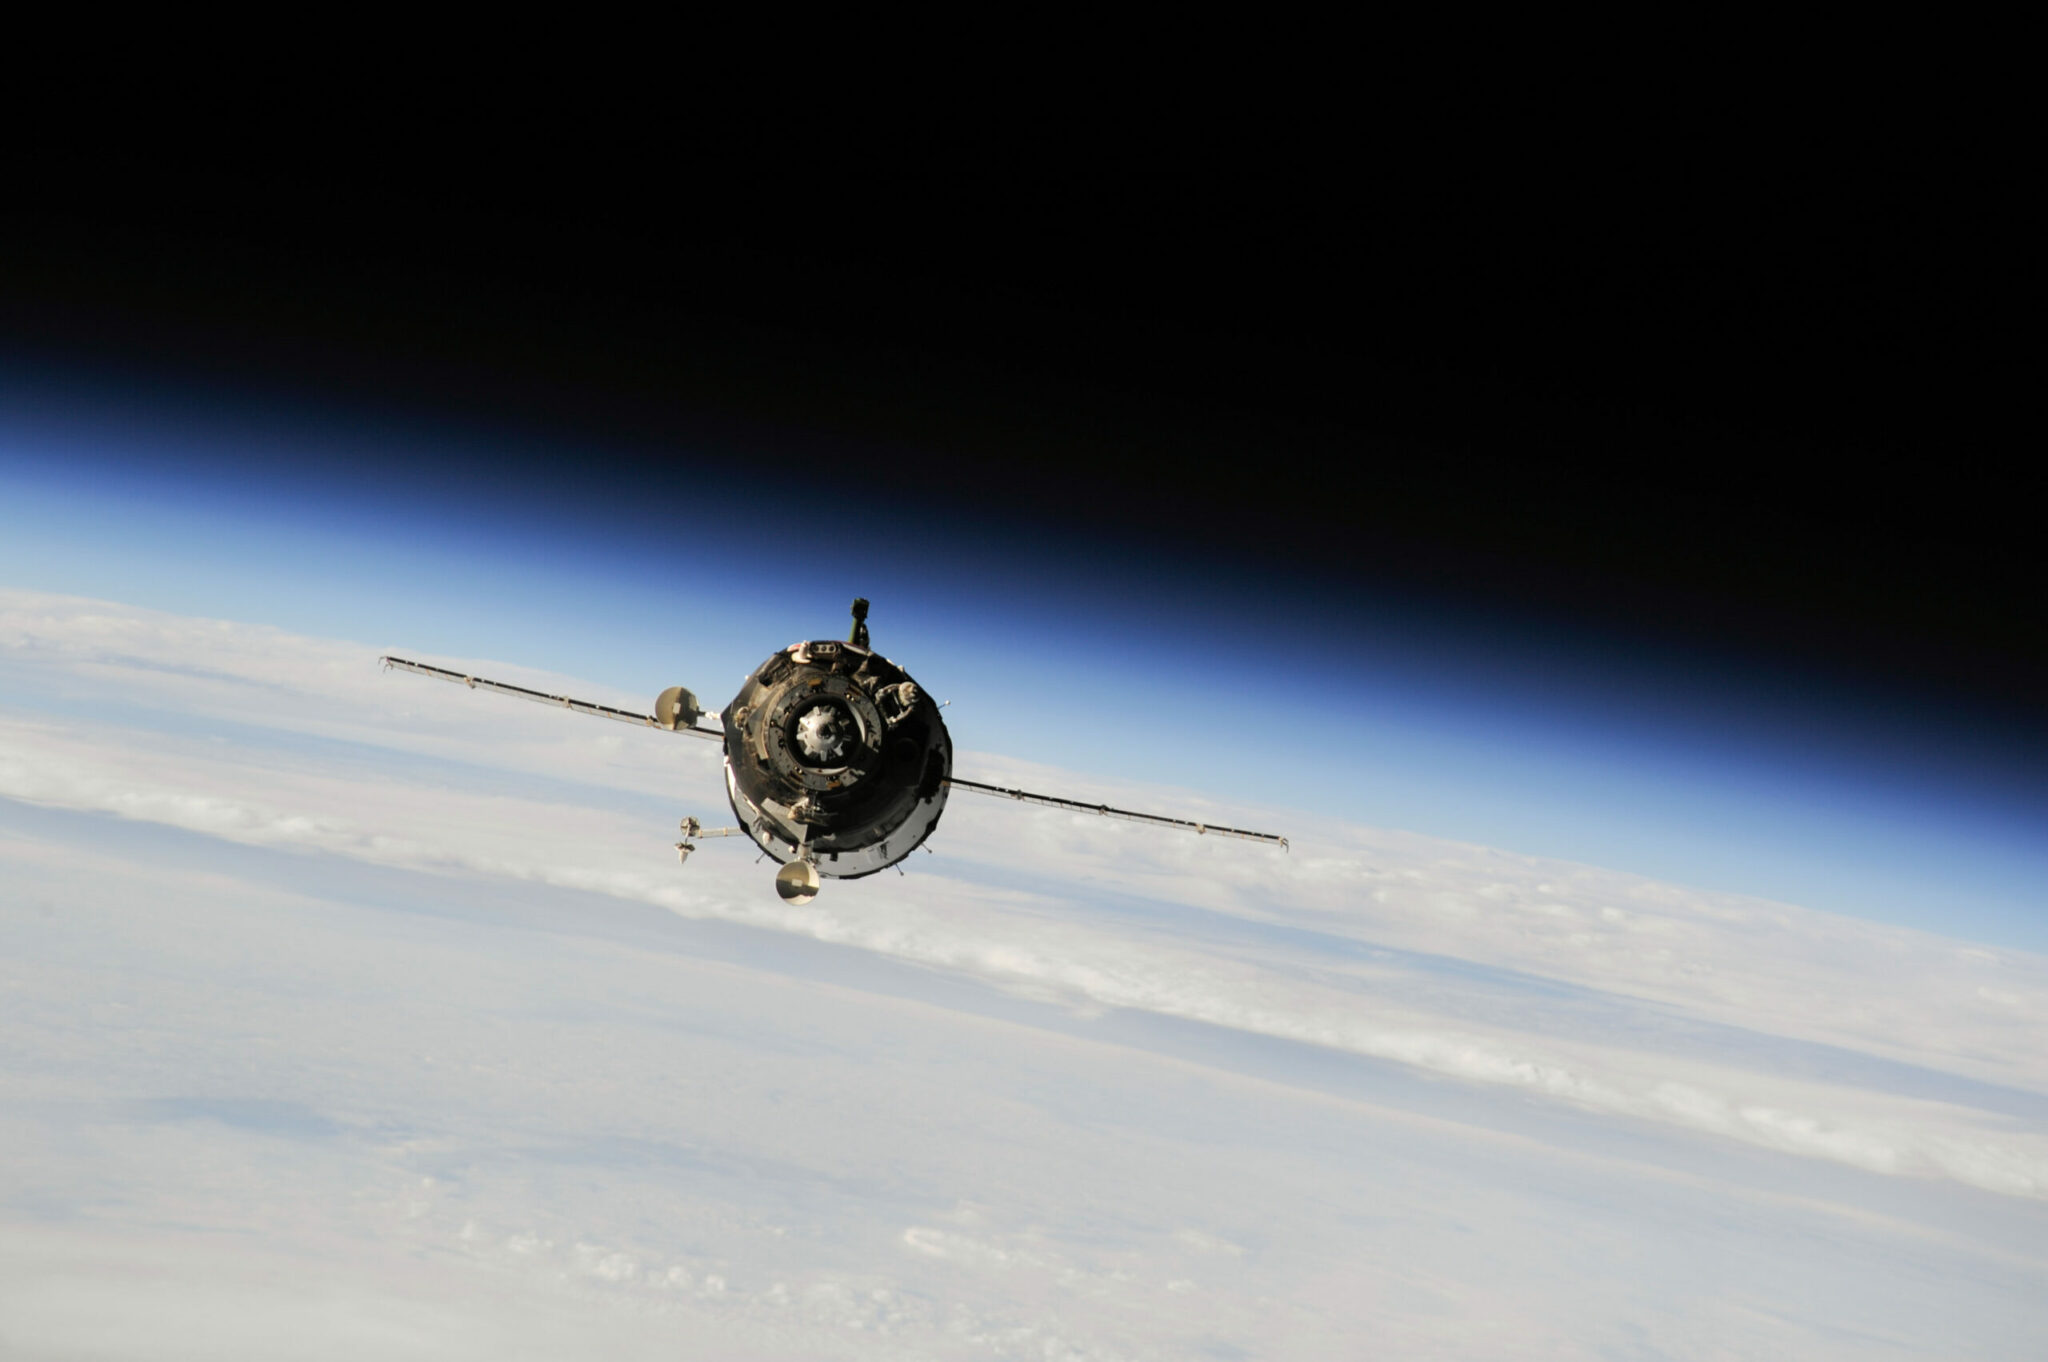 how many cosmonauts did the russian spacecraft vokshod 1 carry into orbit and what was the altitude record set scaled